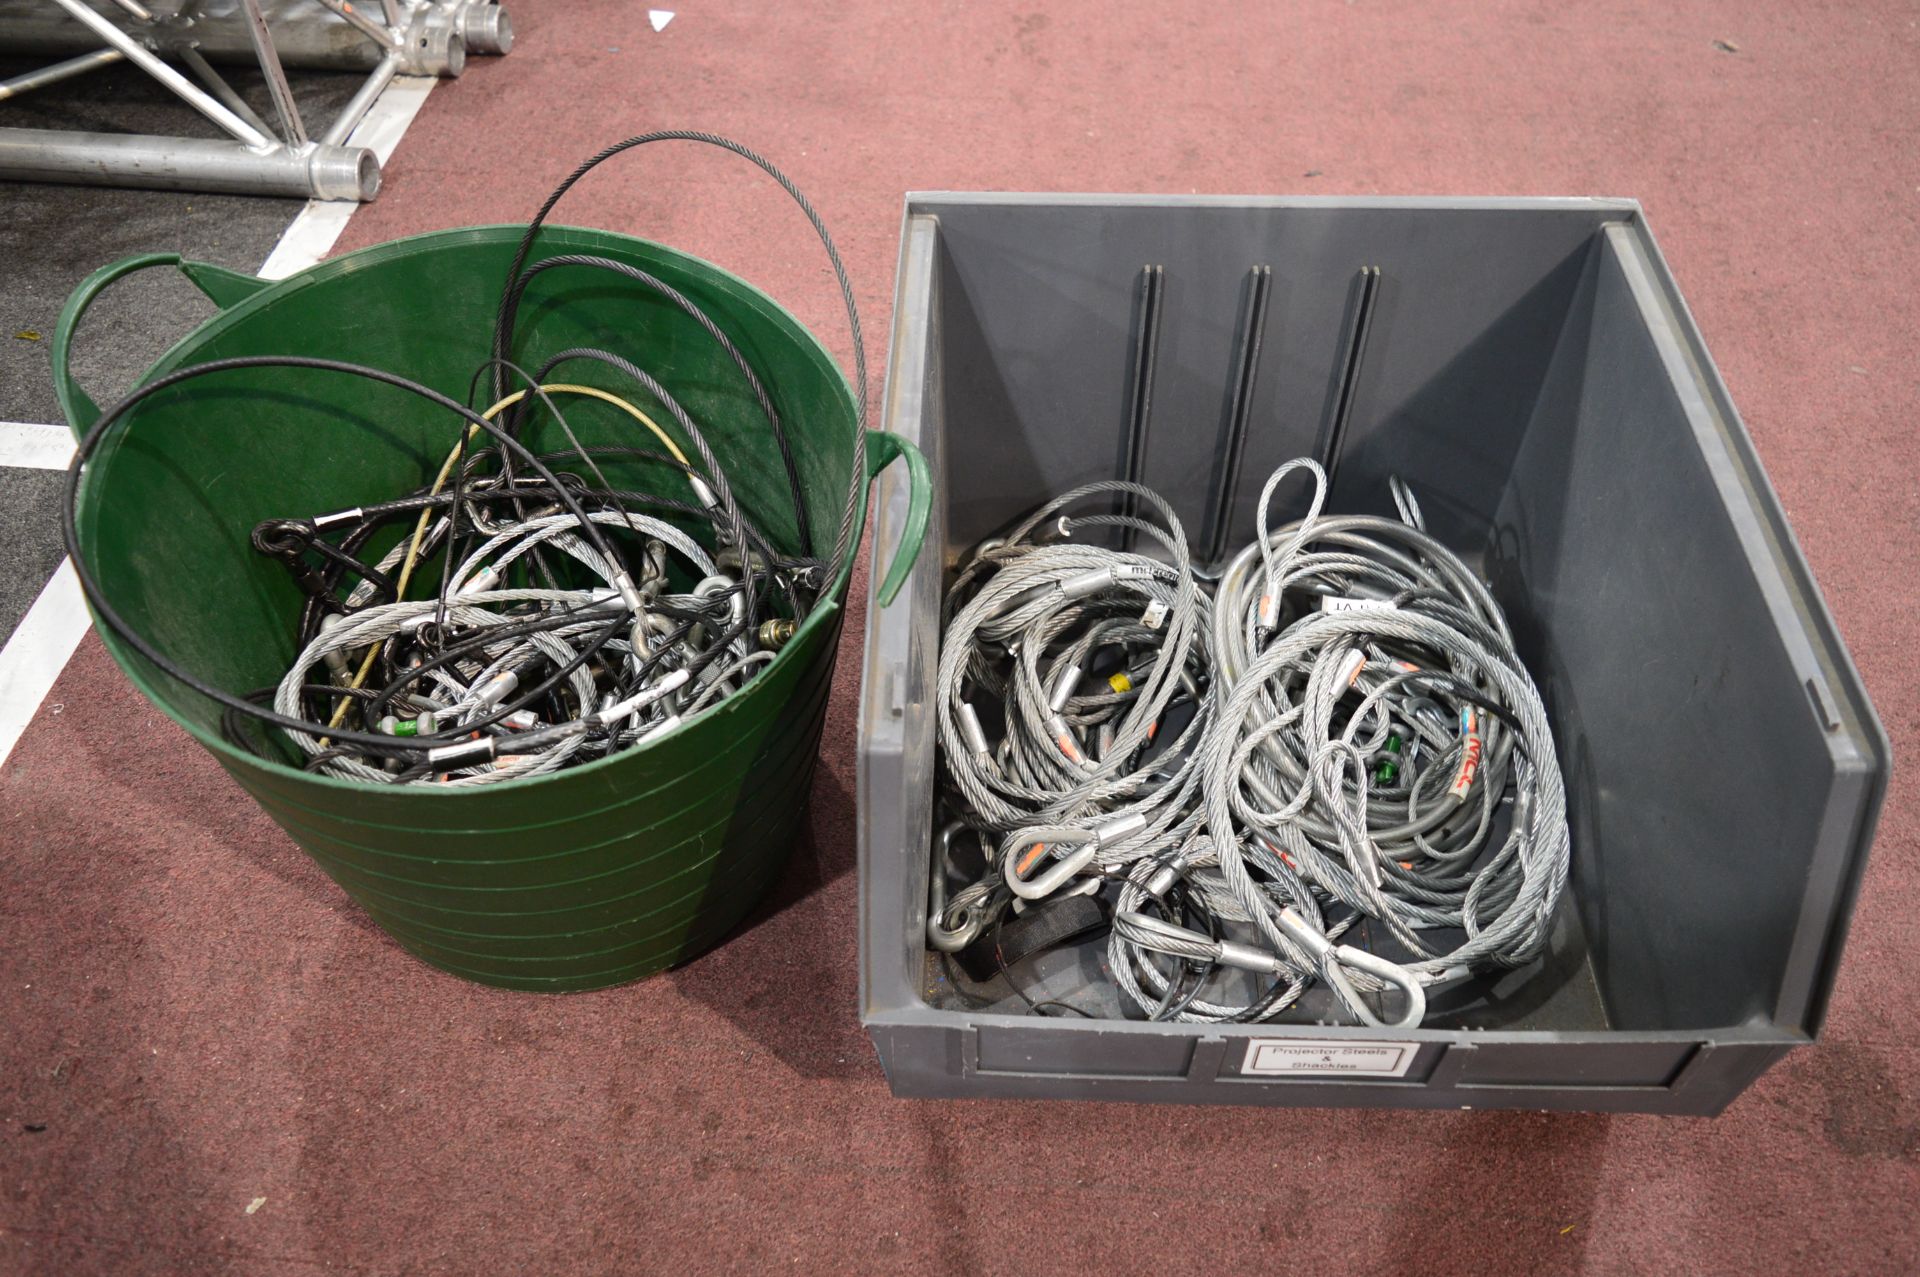 Quantity of various hanging steels and carabiner clips: Unit 500, Eckersall Road, Birmingham B38